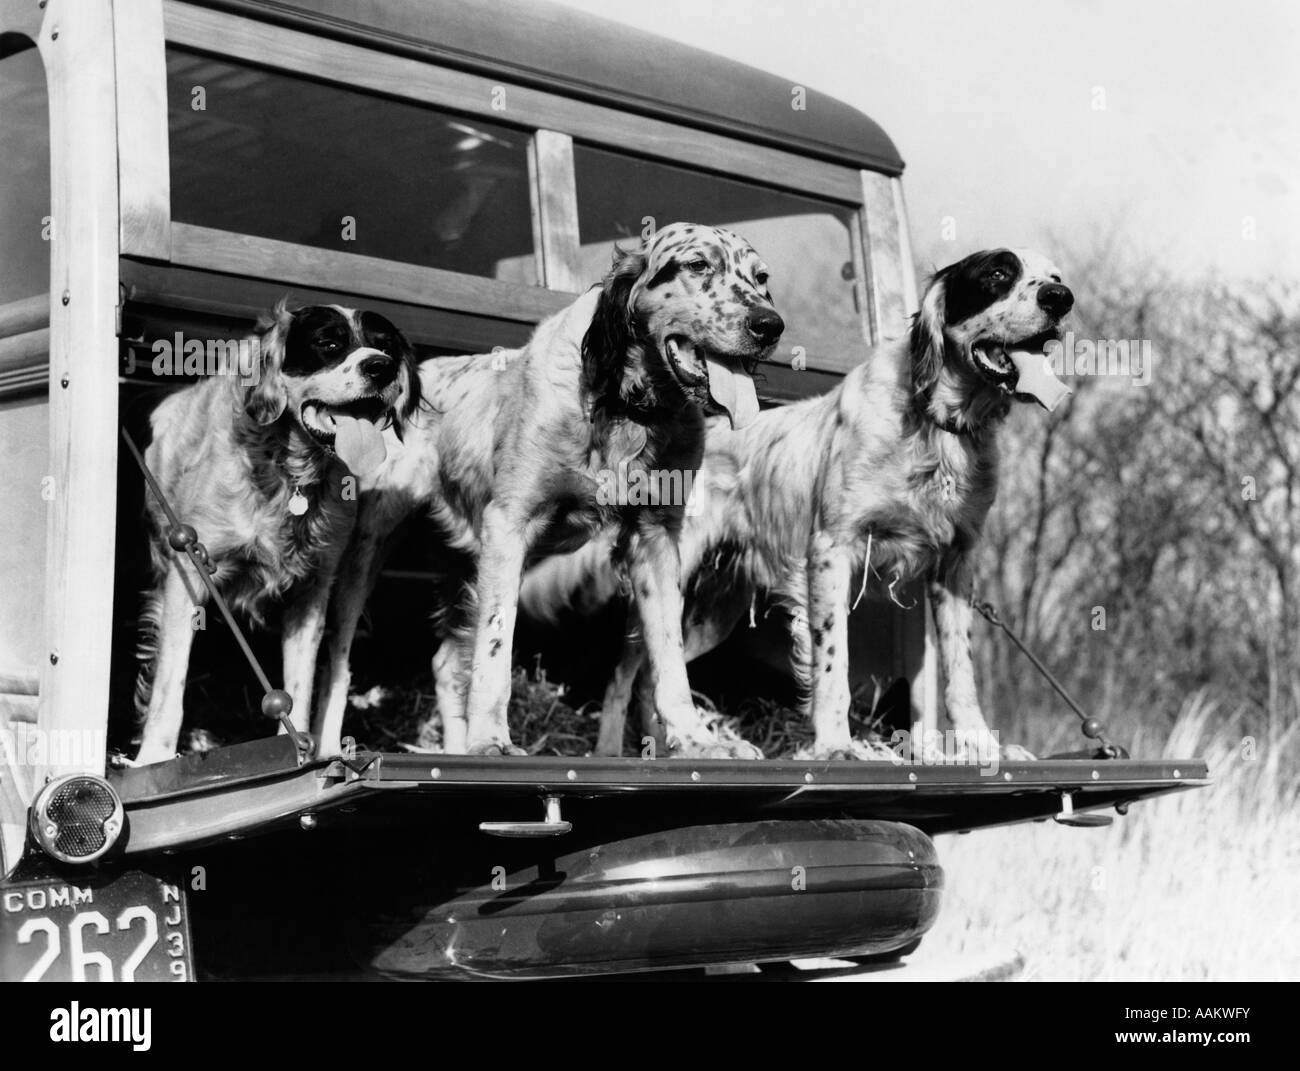 1930s 1939 ENGLISH SETTER HUNTING DOGS ON TAILGATE OF WOOD BODY STATION WAGON AUTOMOBILE Stock Photo